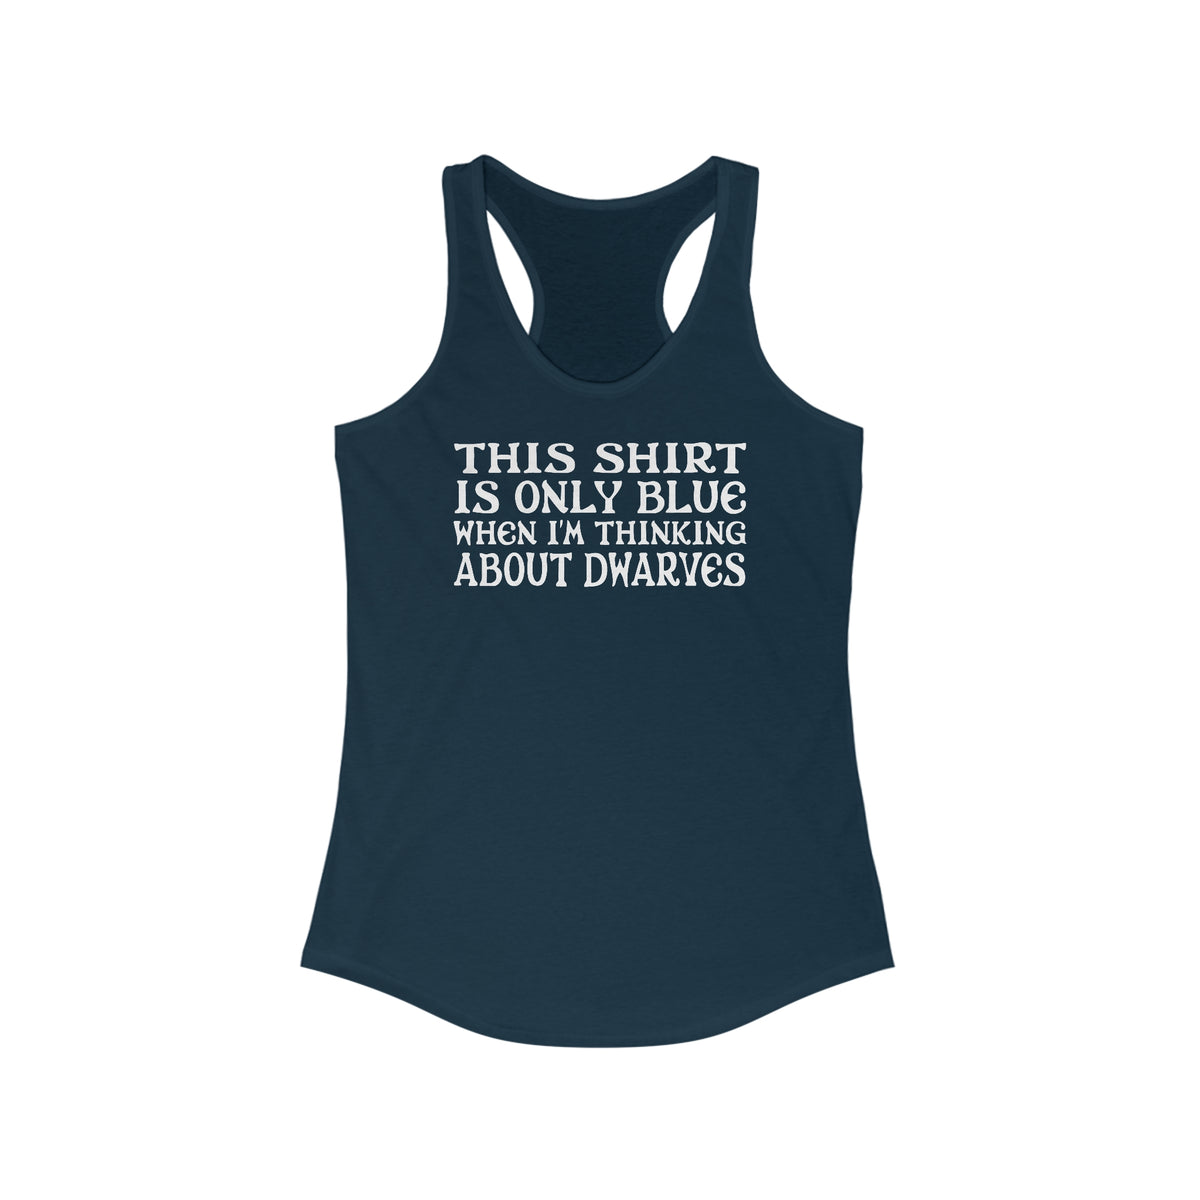 This Shirt Is Only Blue When I'm Thinking About Dwarves - Women’s Racerback Tank